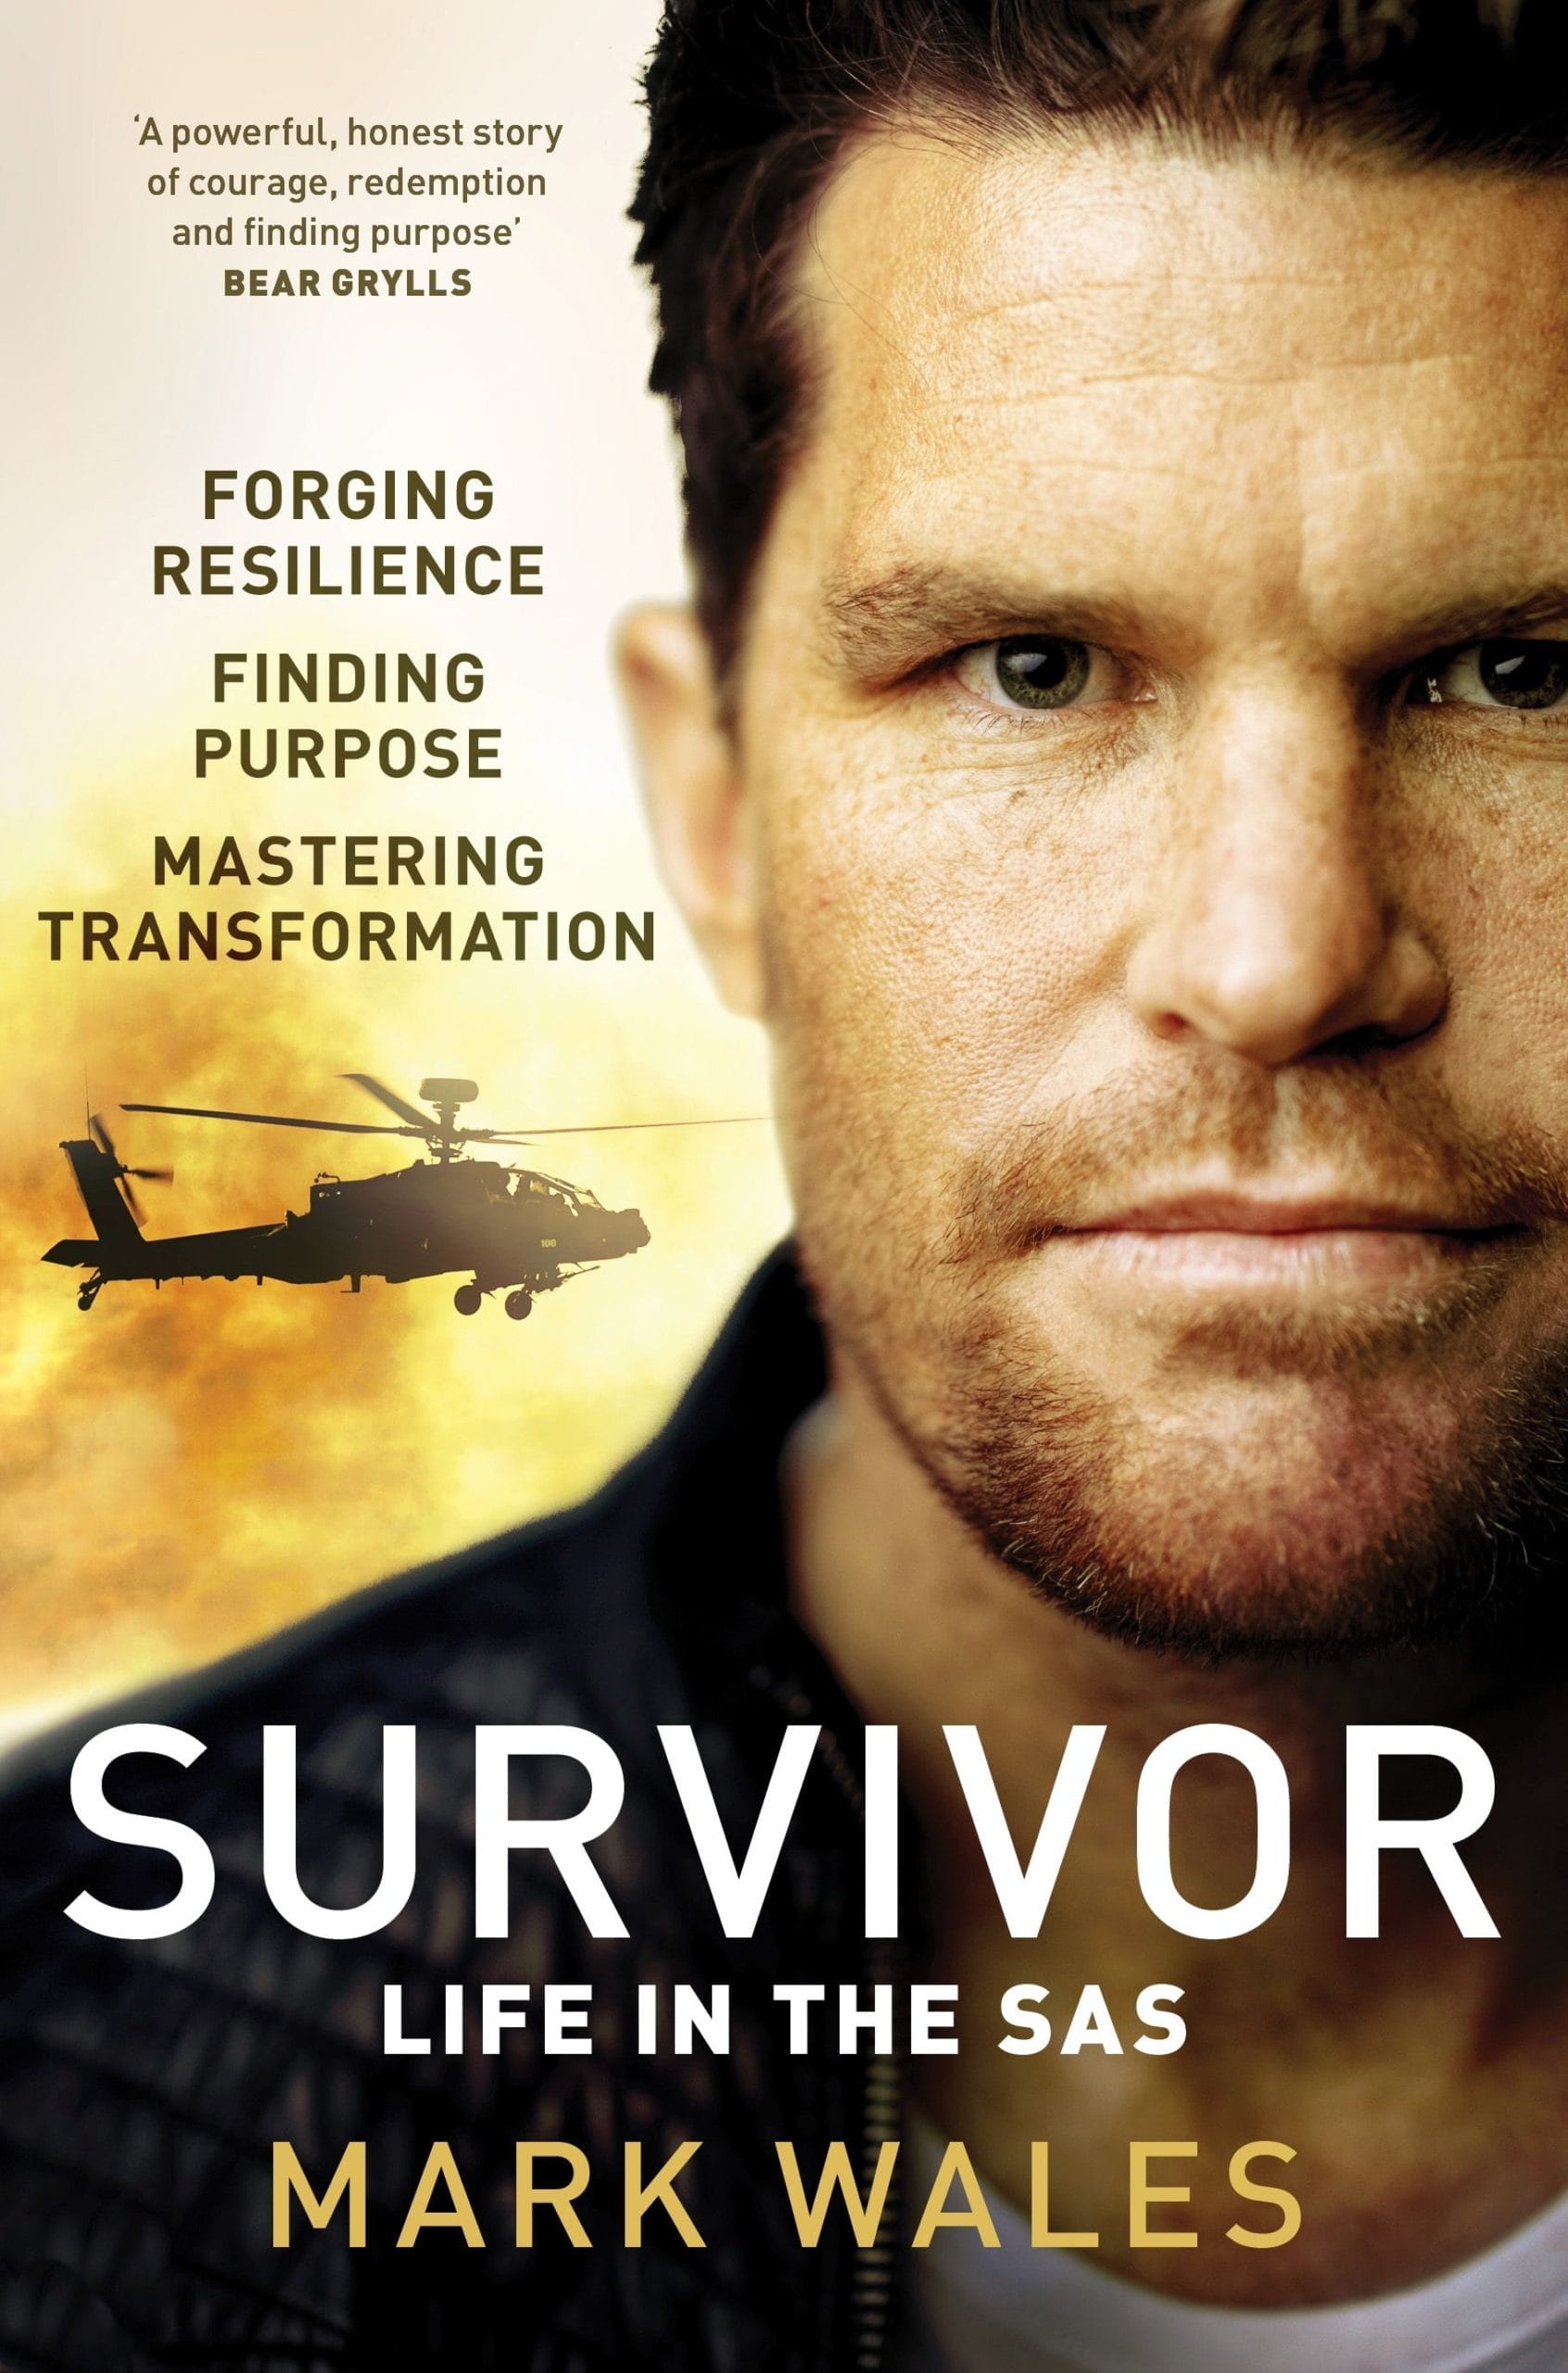 Book titled "Survivor: Life in the SAS"